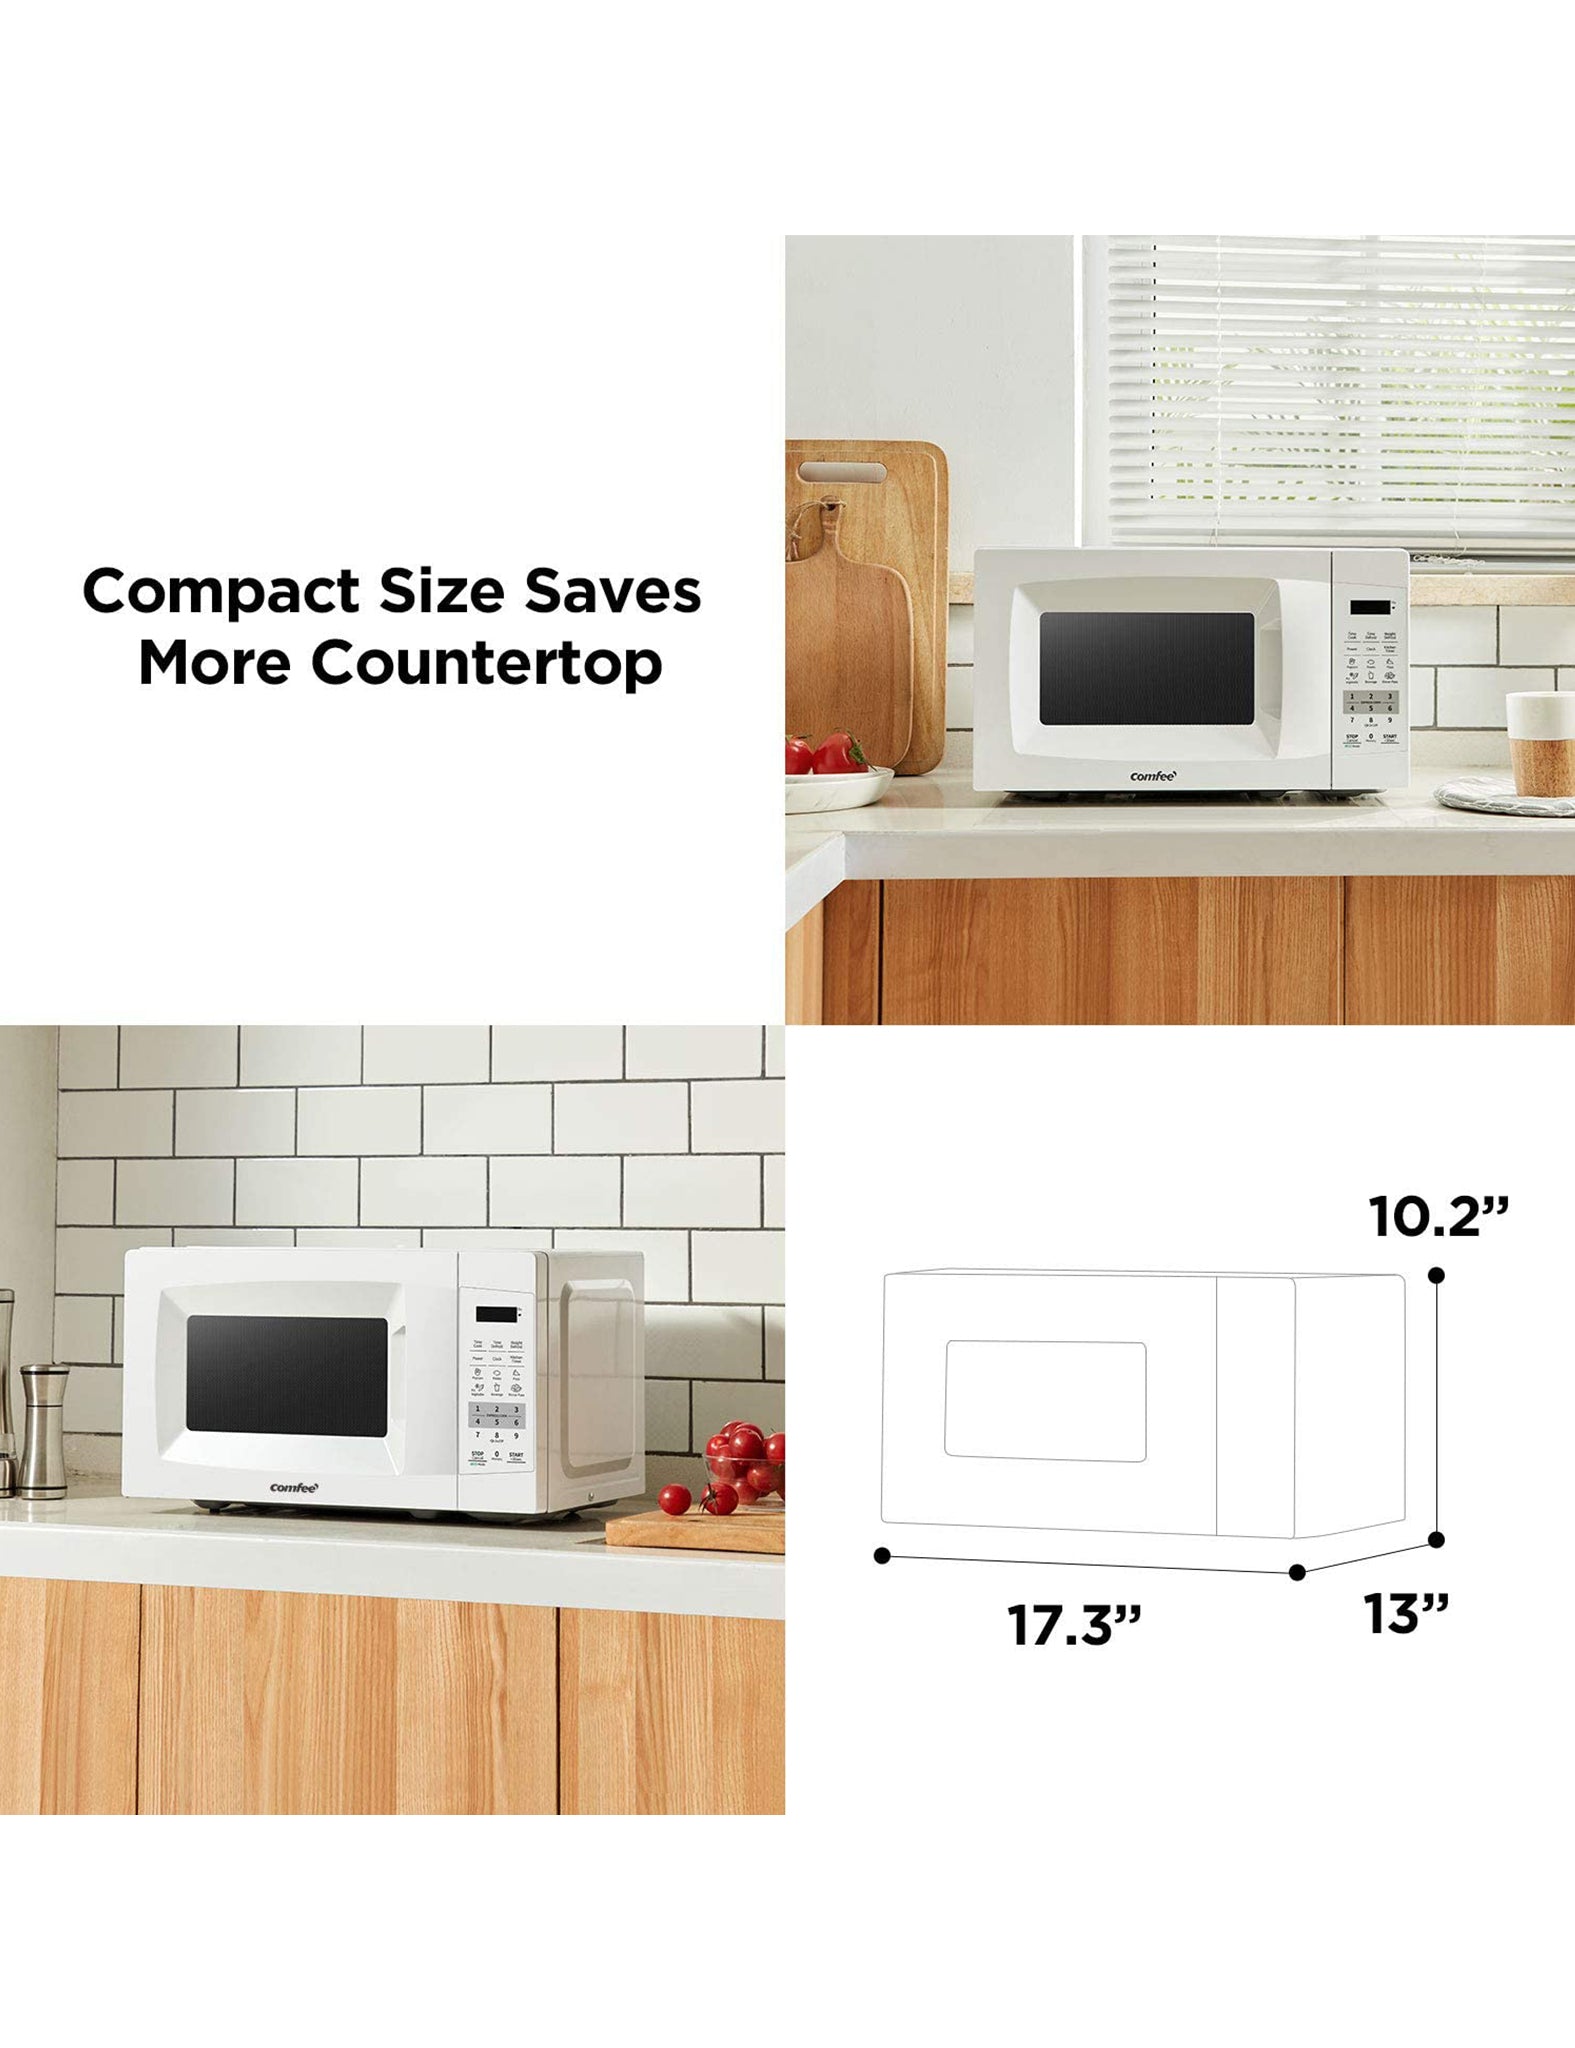 COMFEE CMO-C20M1WB Countertop Microwave Oven with 11 power levels, Fast  Multi-stage Cooking, Turntable Reset Function, Speedy Cooking, Weight/Time